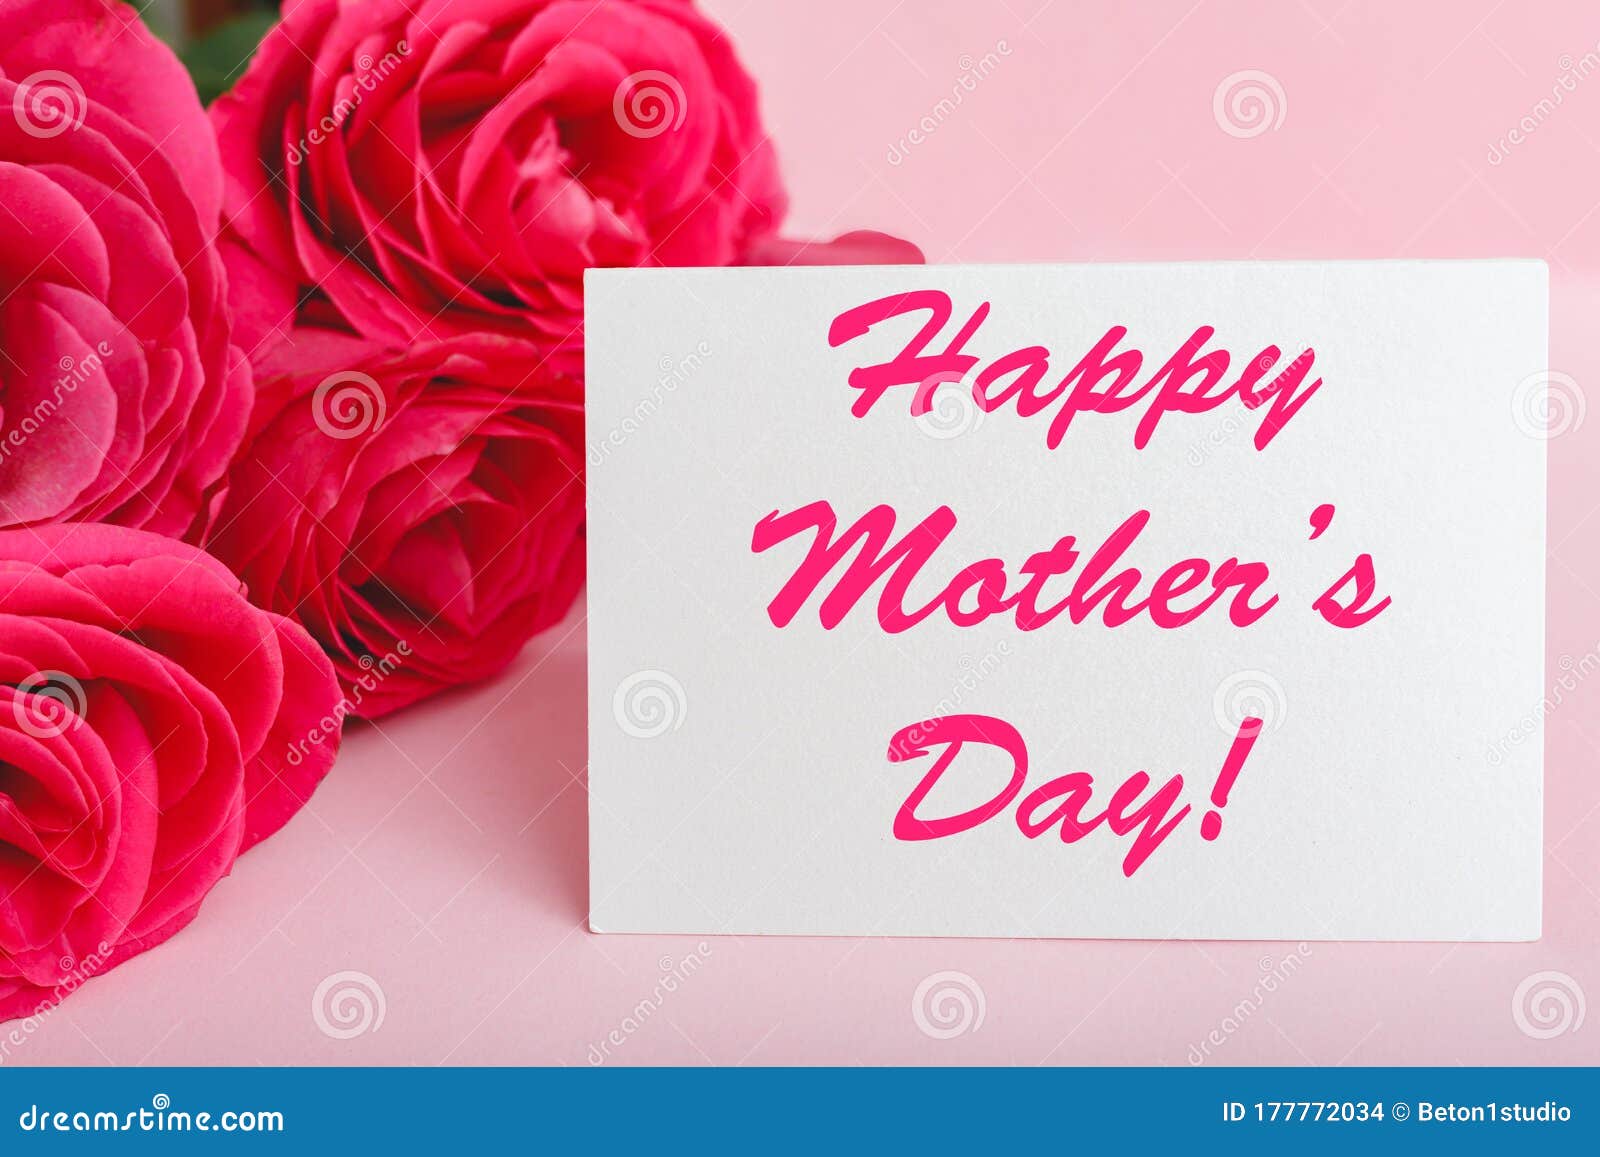 Happy Mothers Day Text On Gift Card In Flower Bouquet Of